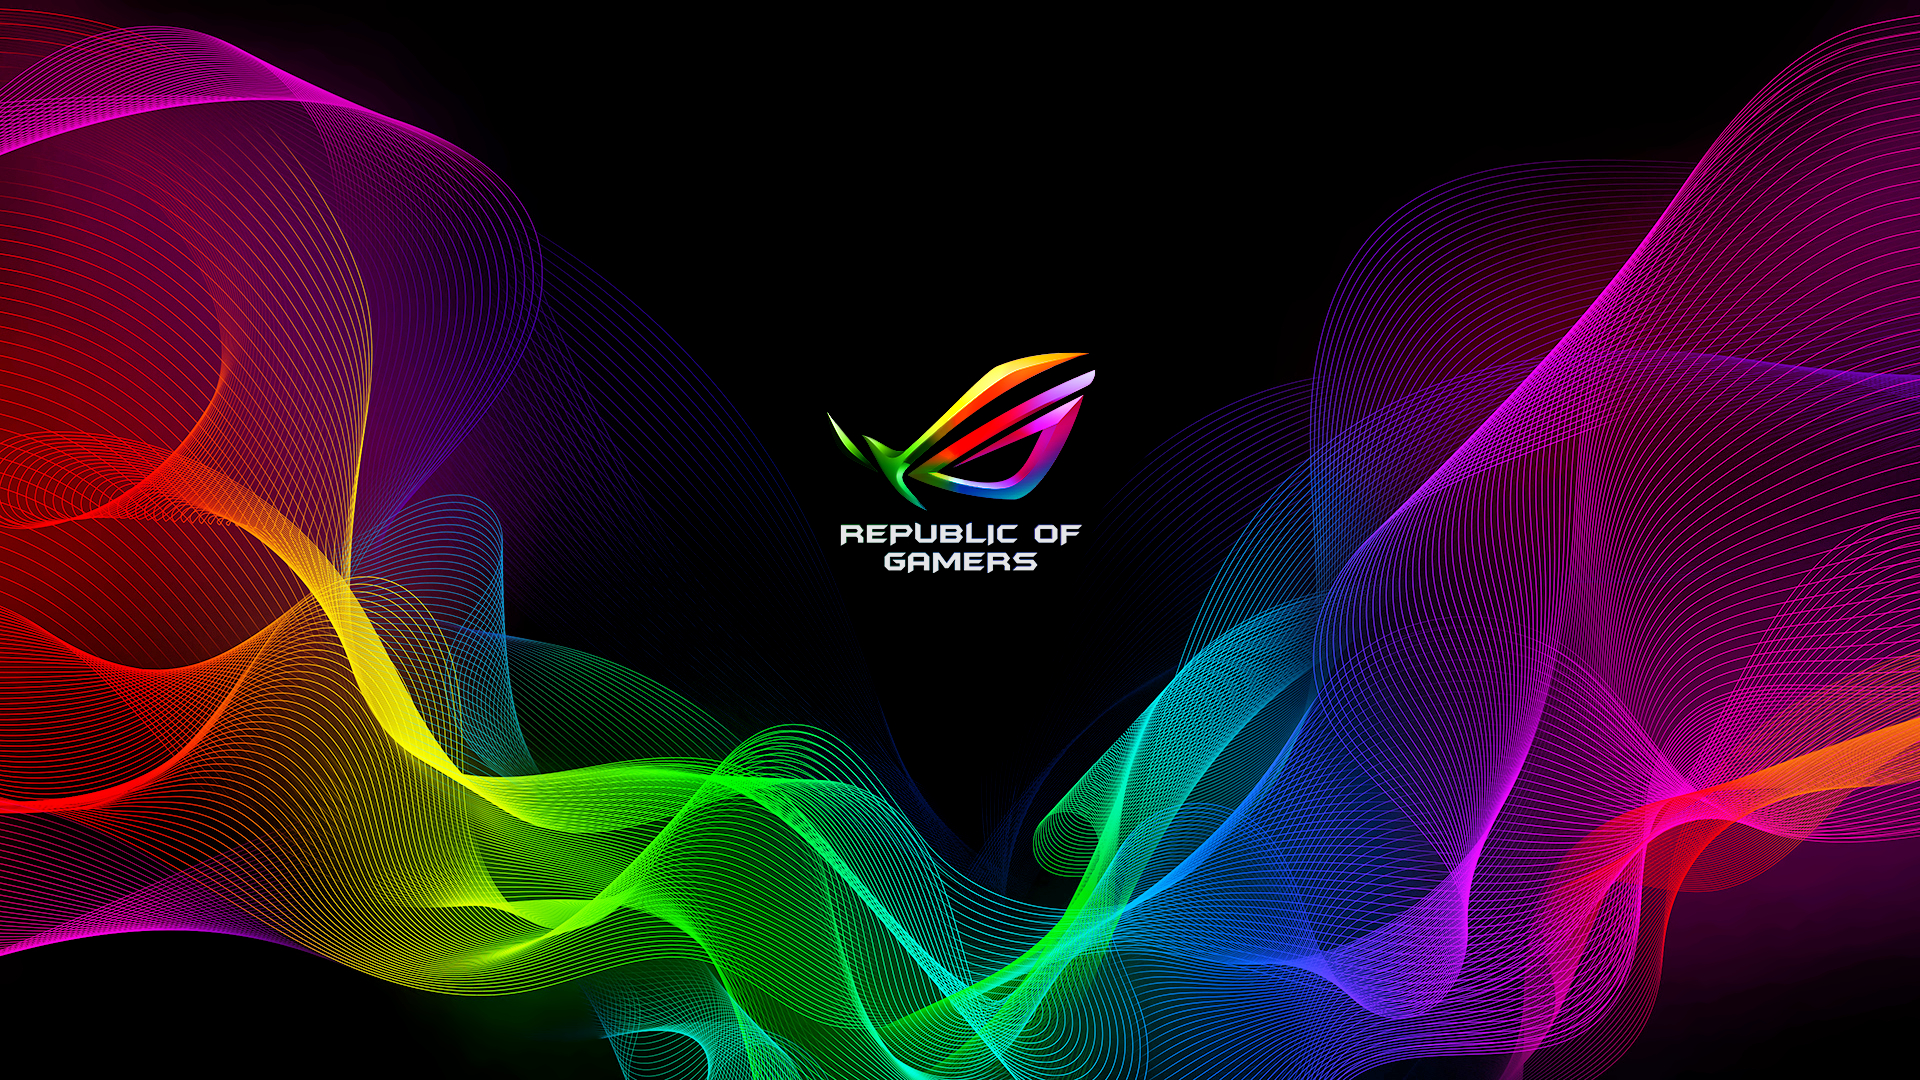 1920x1080 RGB ROG wallpaper based on the one from Razer | Live wallpaper for pc, Gaming wallpapers, Desktop wallpaper